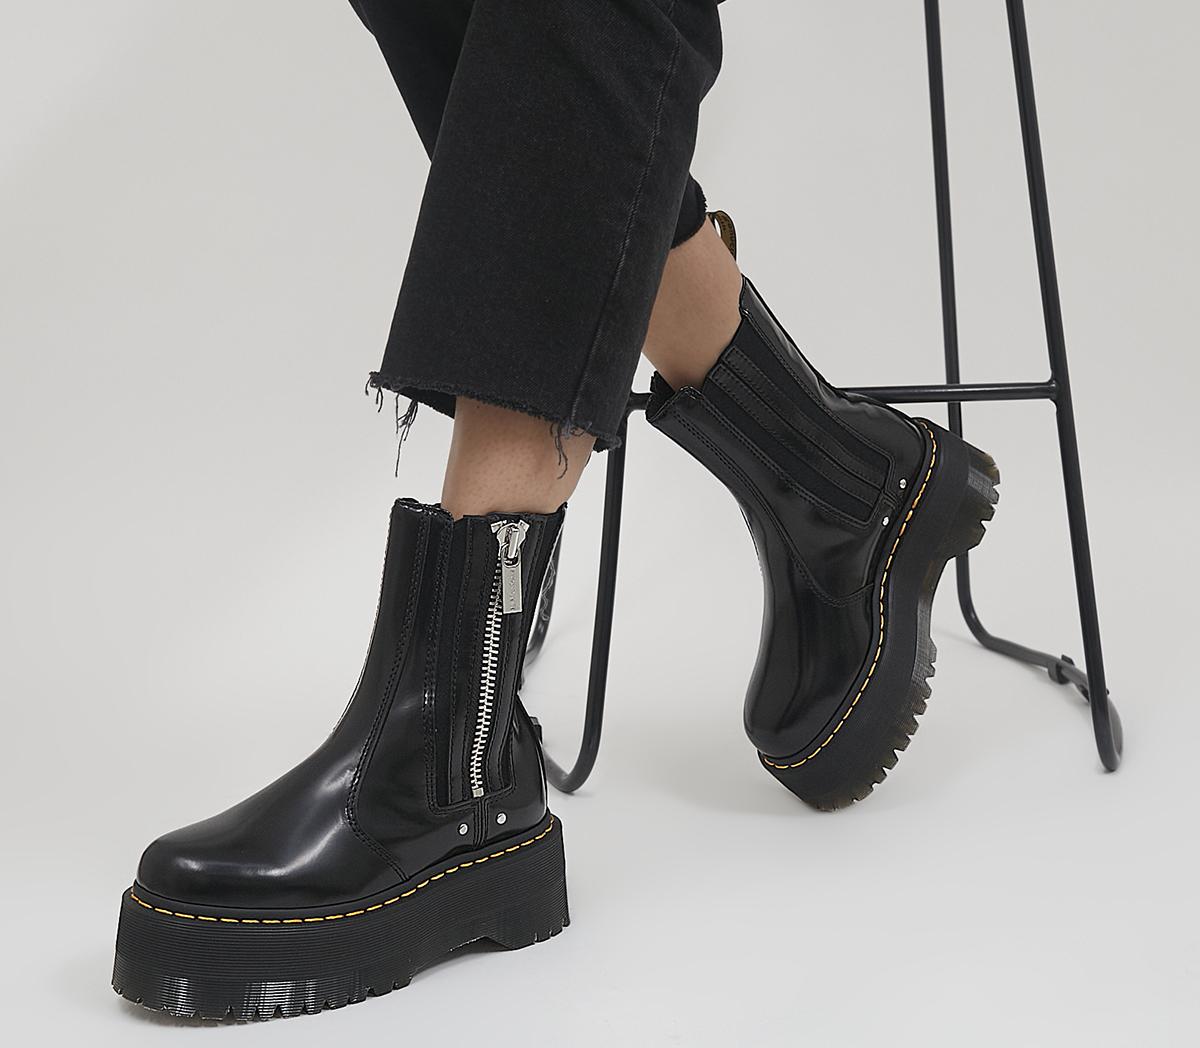 Dr. Martens 2976 Max Boots Black - Women's Ankle Boots